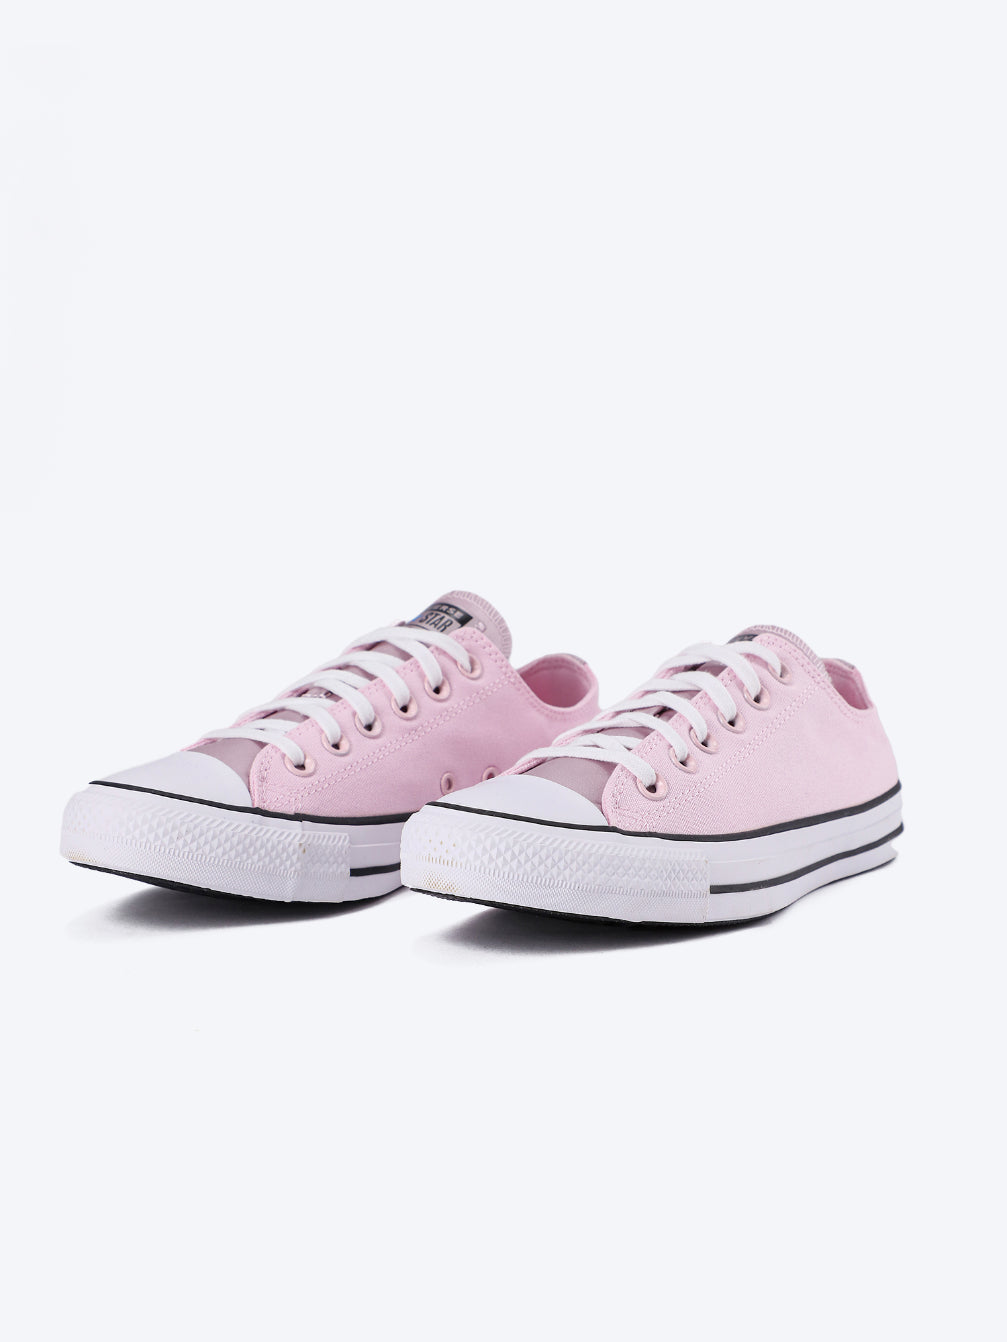 Converse Women's Chuck Taylor All Star Low Top 'Anodized Metals' - 570288C